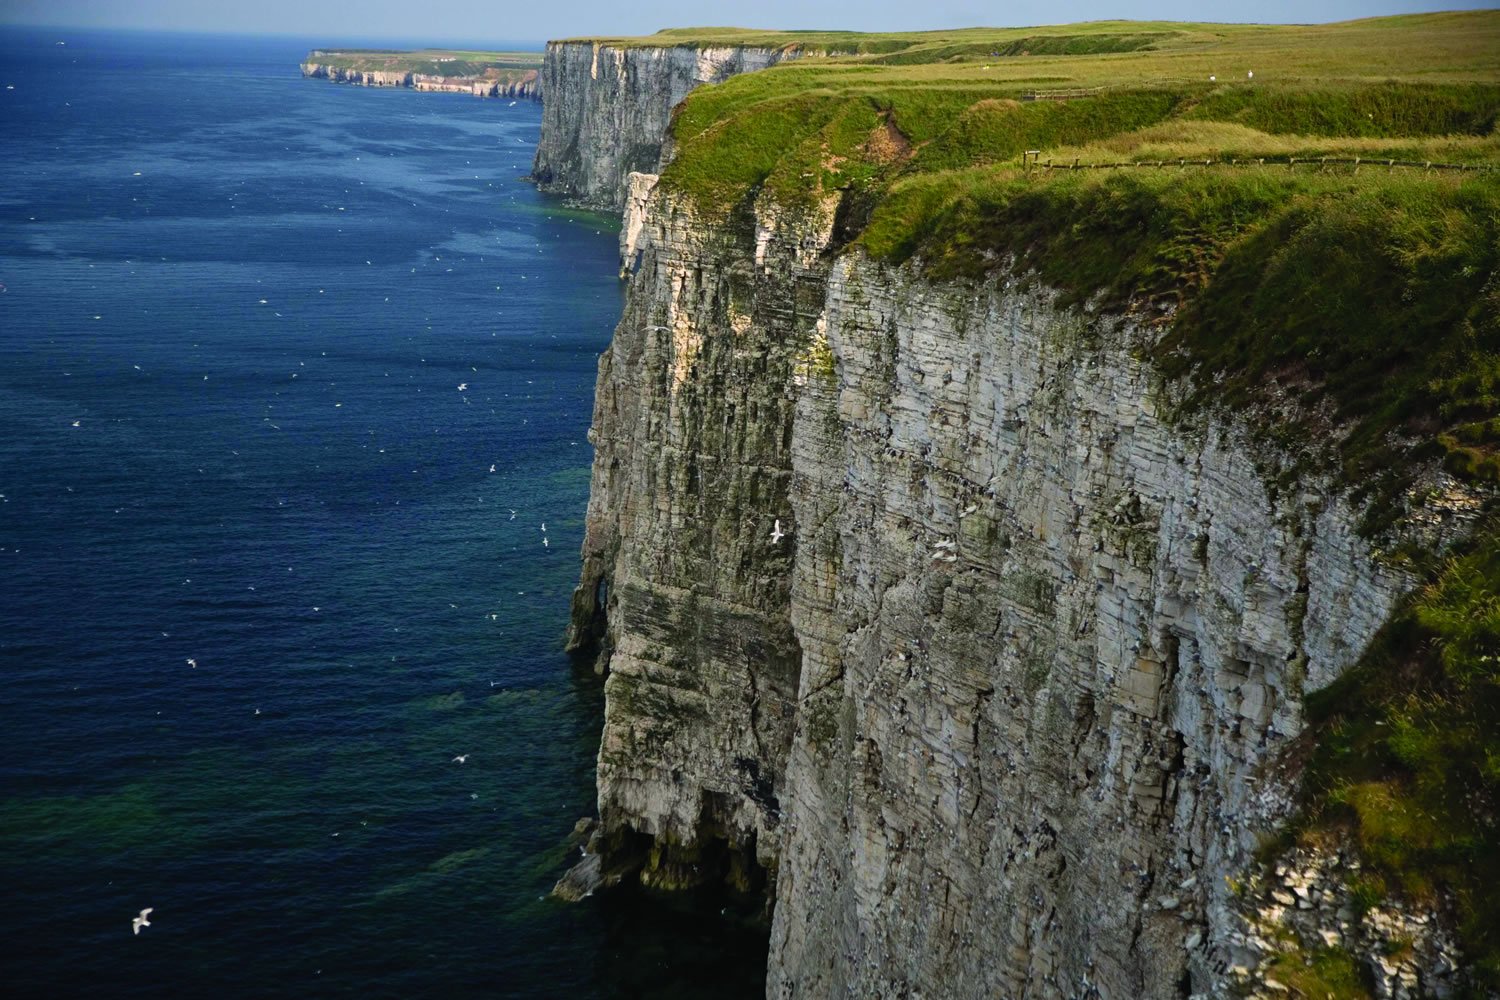 Image name bempton cliffs the 16 image from the post In Touch With Nature in Yorkshire.com.